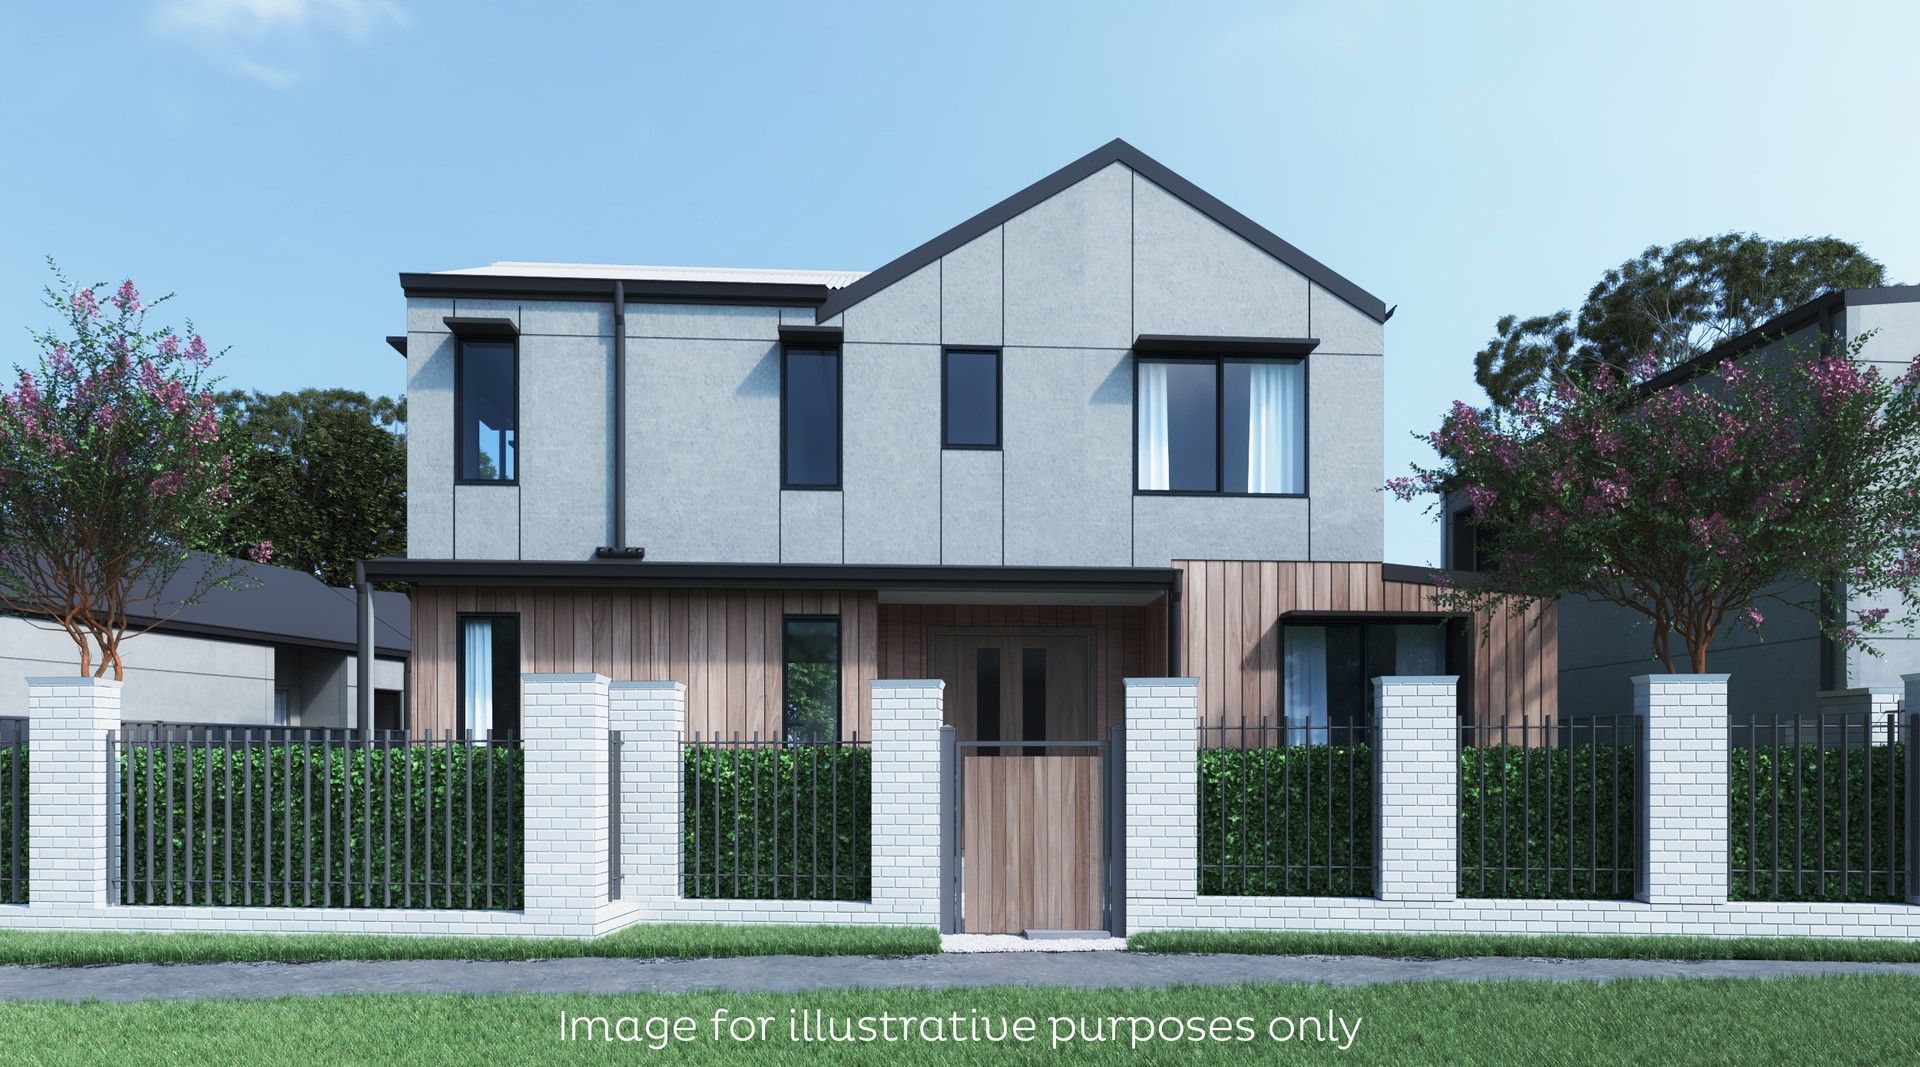 4 bedrooms New House & Land in Lot 55 Wyn Gilmour Circuit STRATHNAIRN ACT, 2615